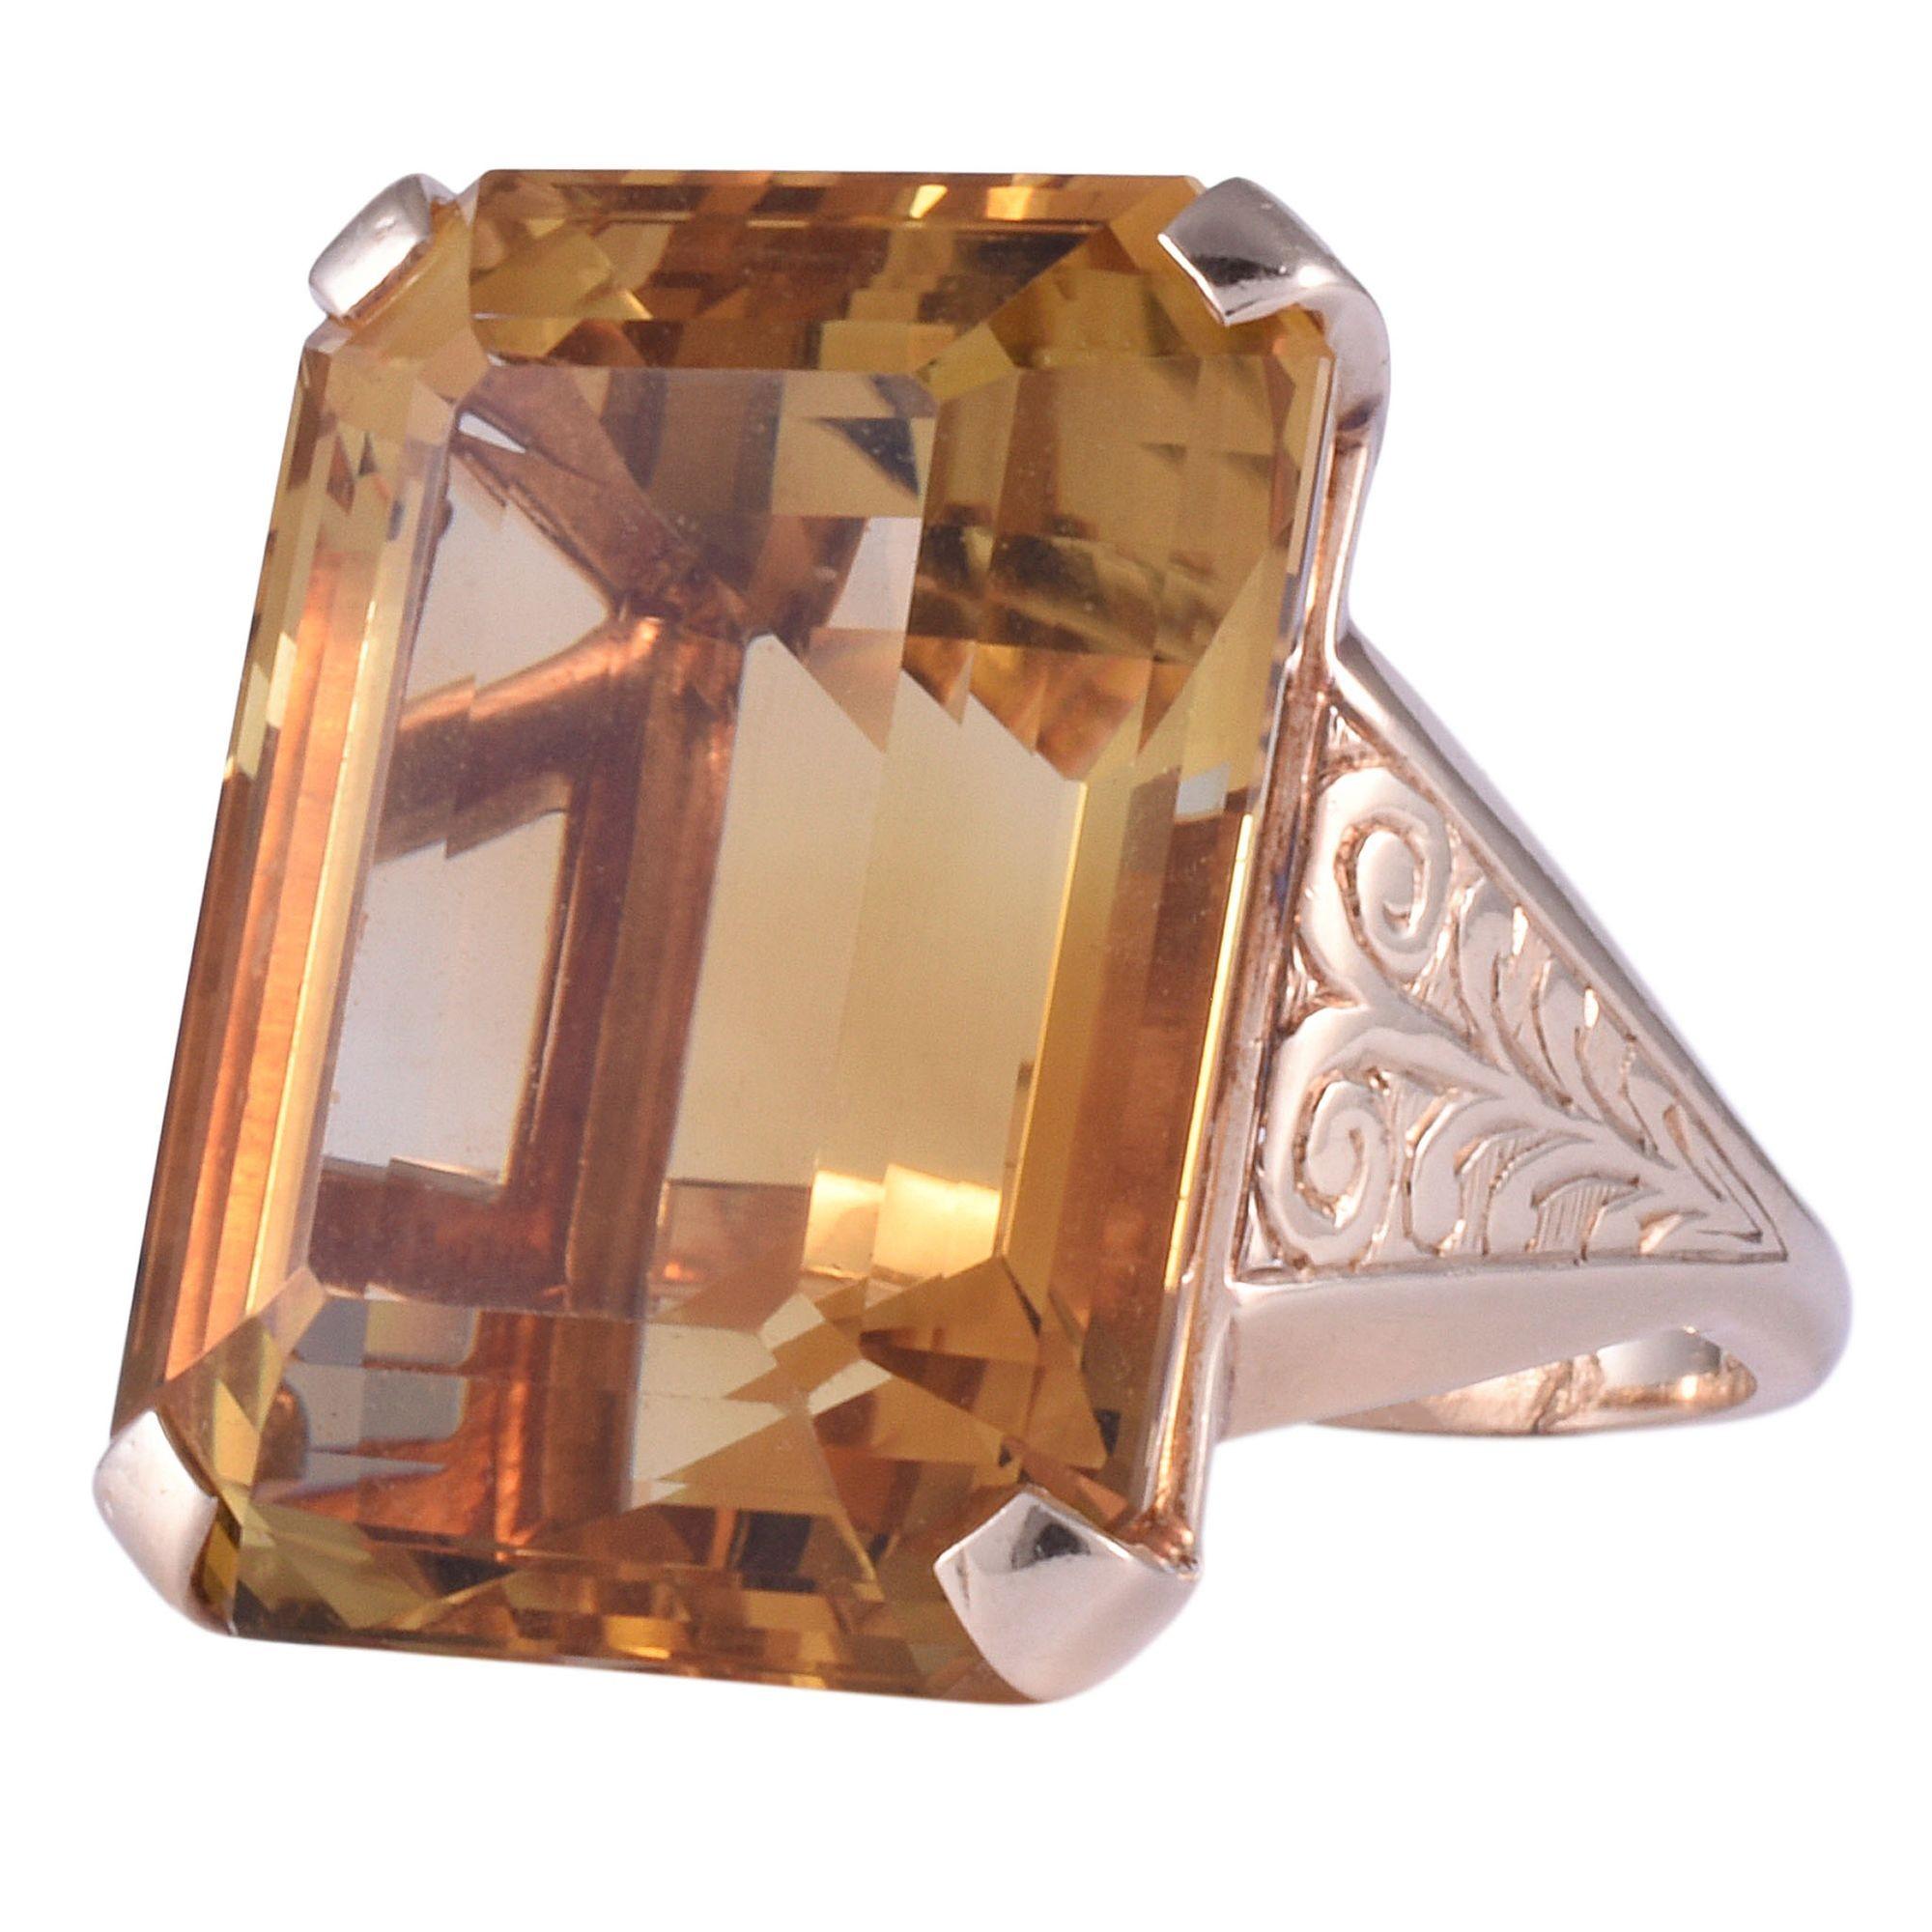 Vintage 33 carat natural untreated citrine 14K gold ring, circa 1950. This vintage ring is crafted in 14 karat yellow gold featuring hand engraving. The vintage engraved ring boasts a rare 33 carat natural untreated citrine. This unique citrine ring